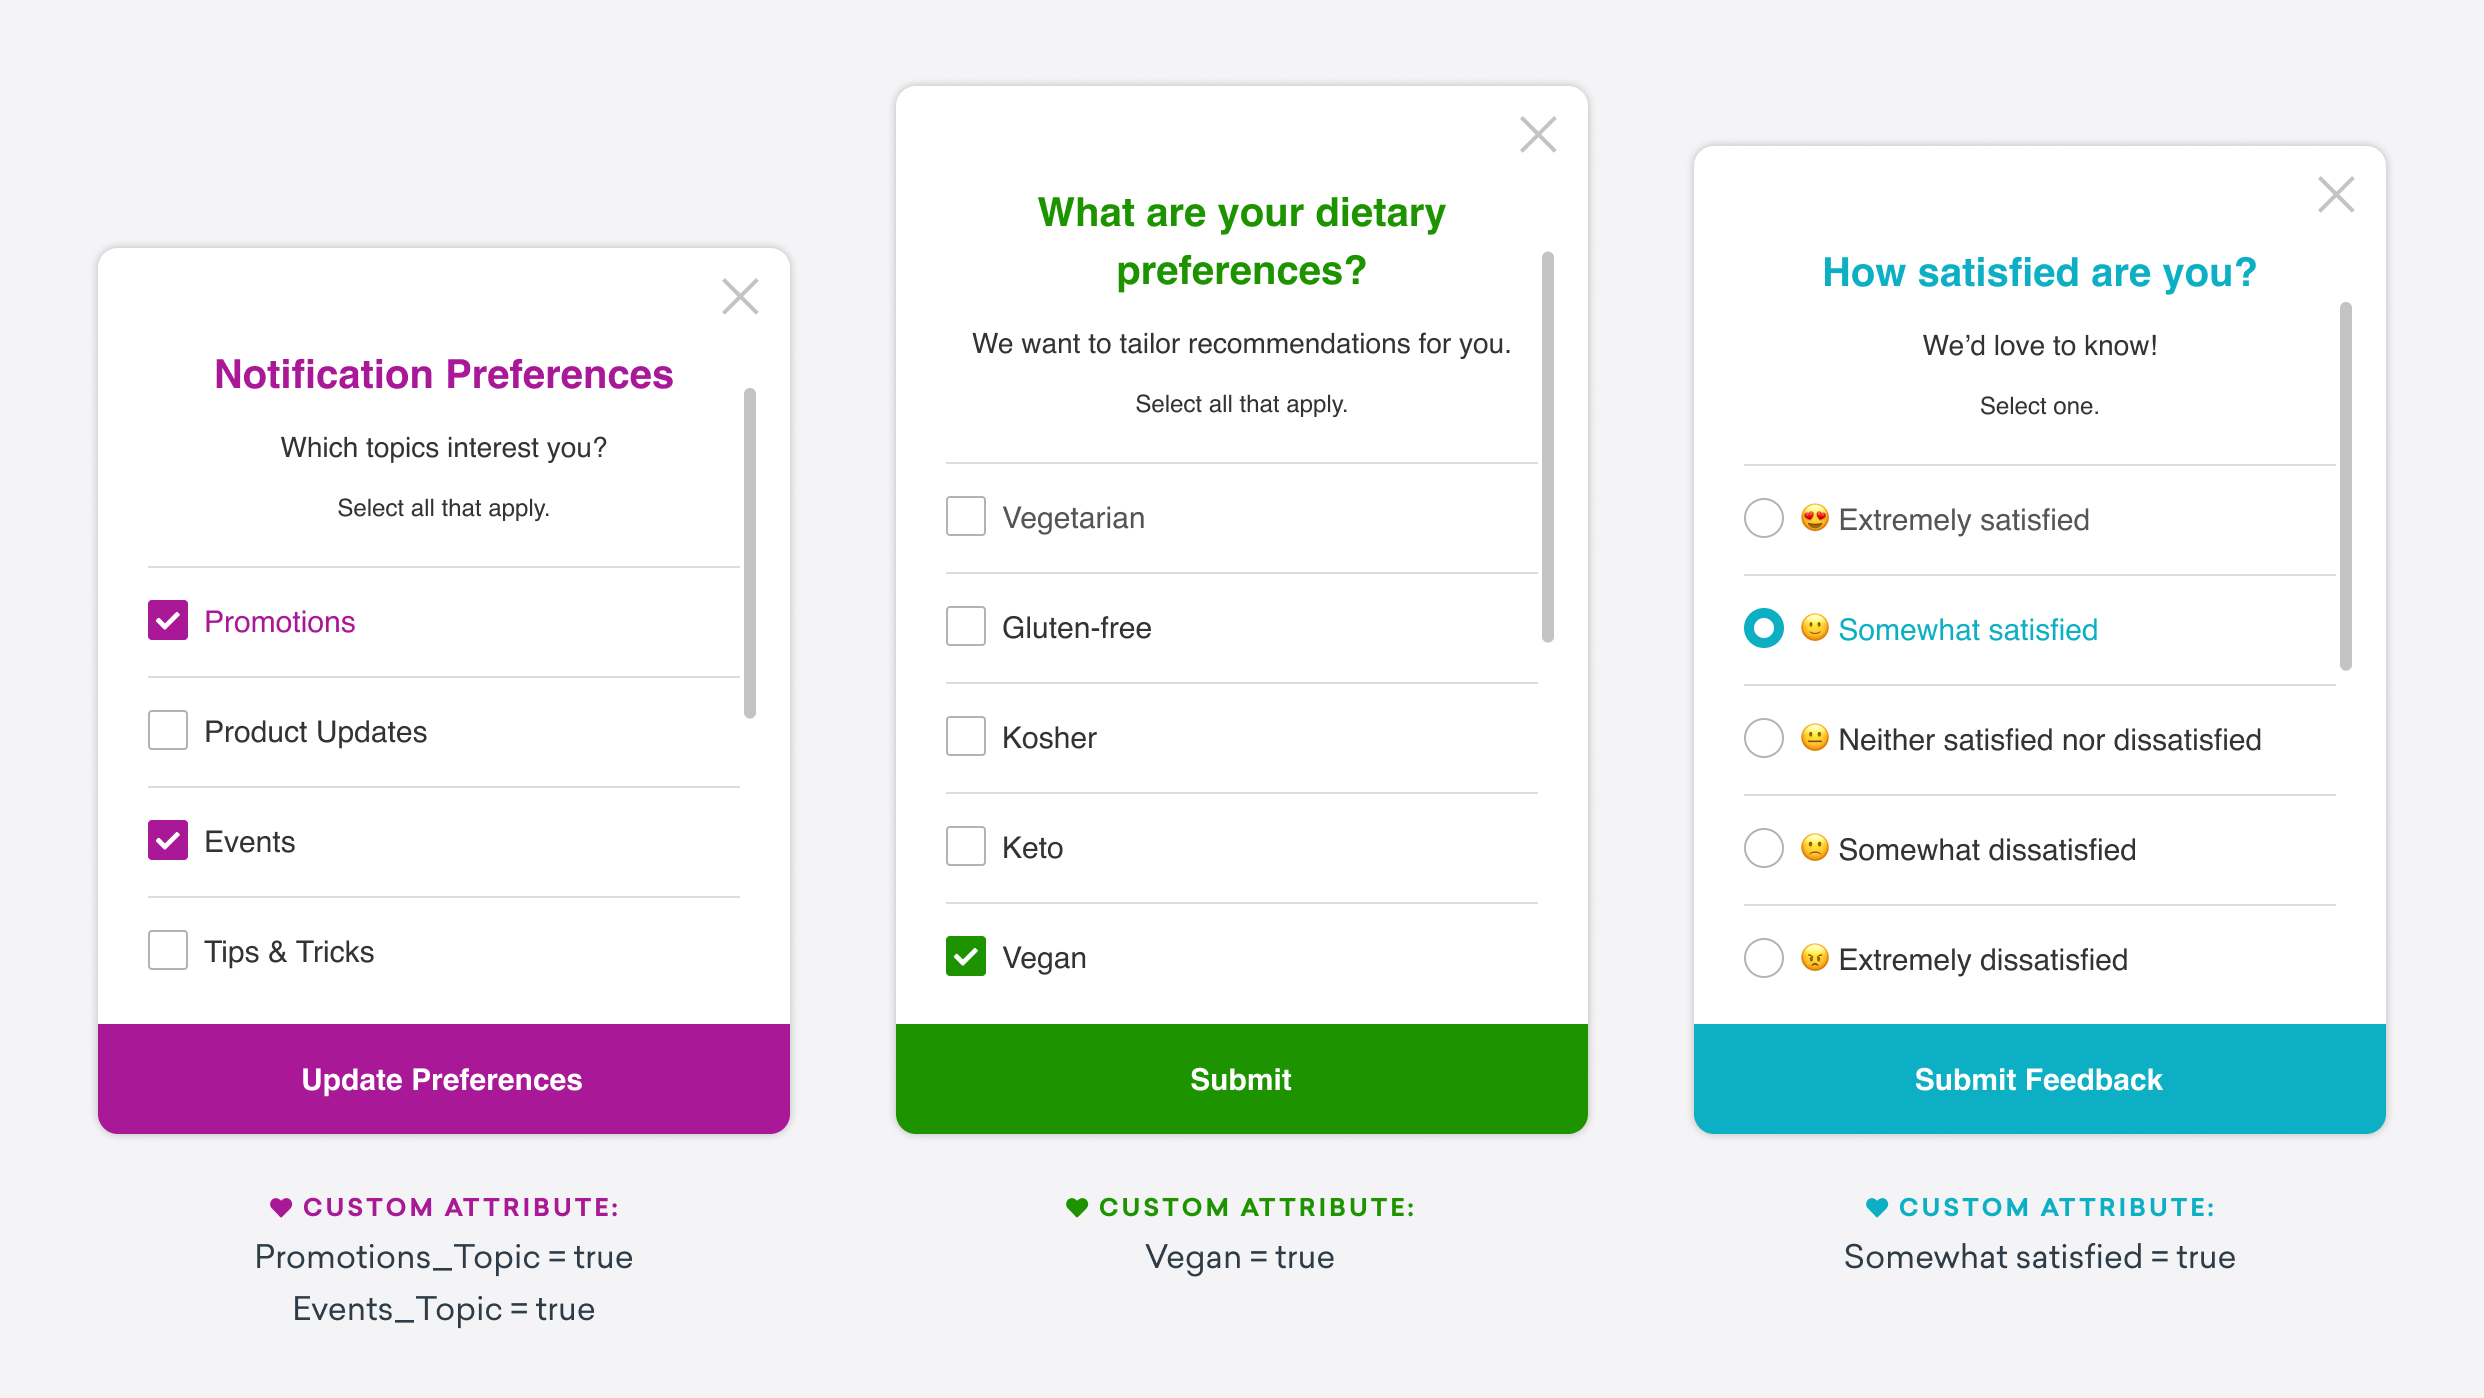 Three simple survey messages: notification preferences, dietary preferences, and a customer satisfaction survey. The selected options in the surveys correspond to custom attributes that will be logged for that user.